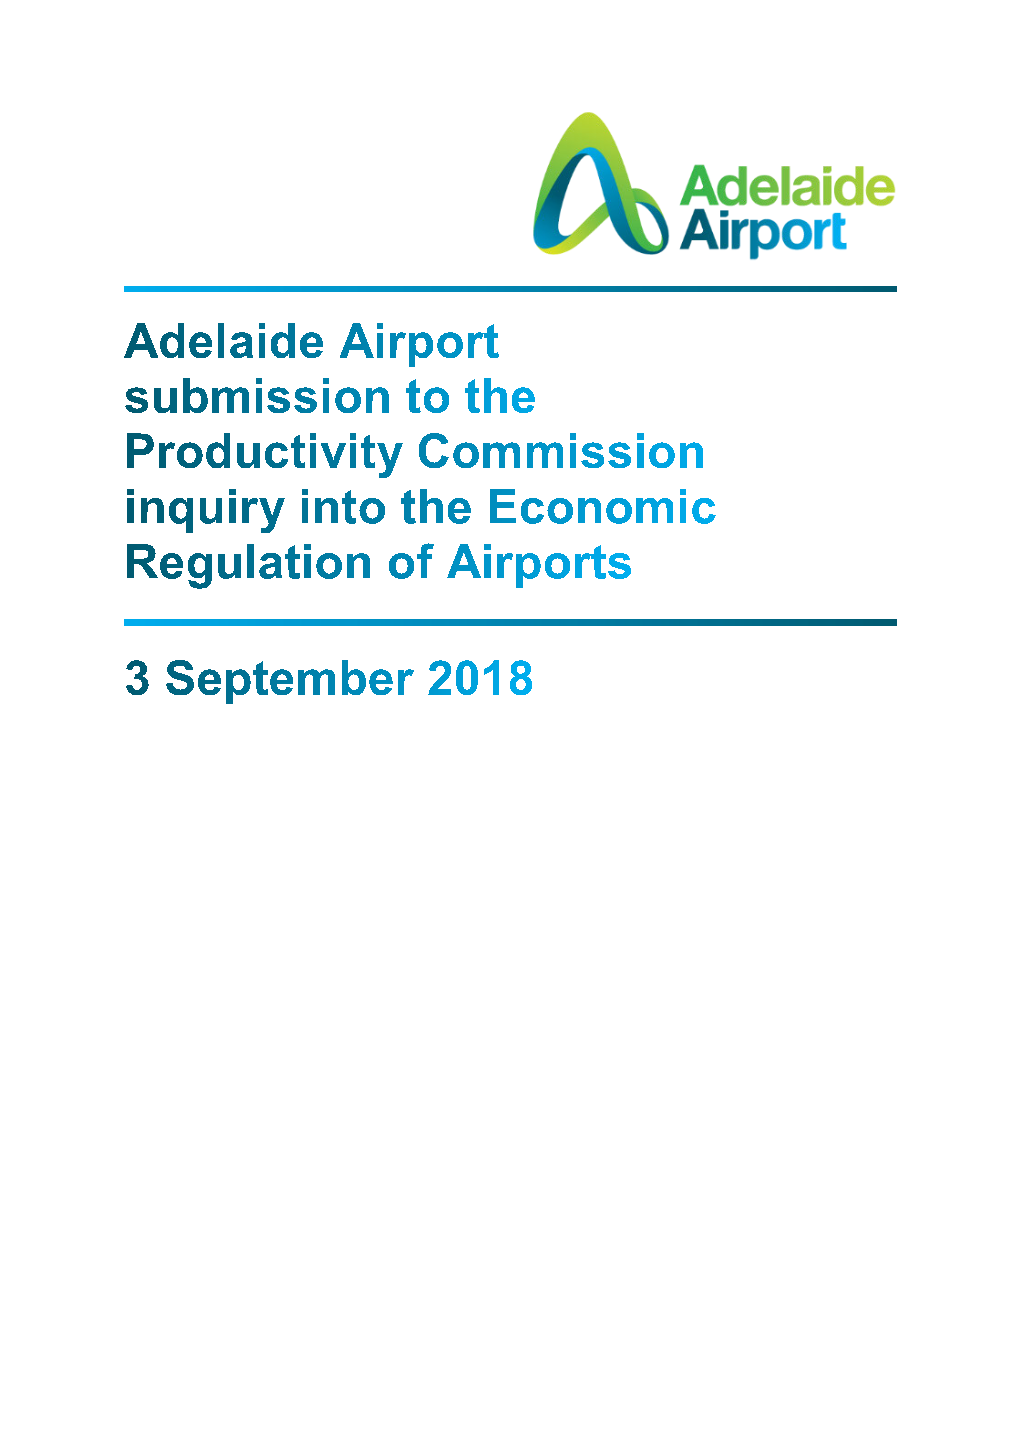 Adelaide Airport Limited